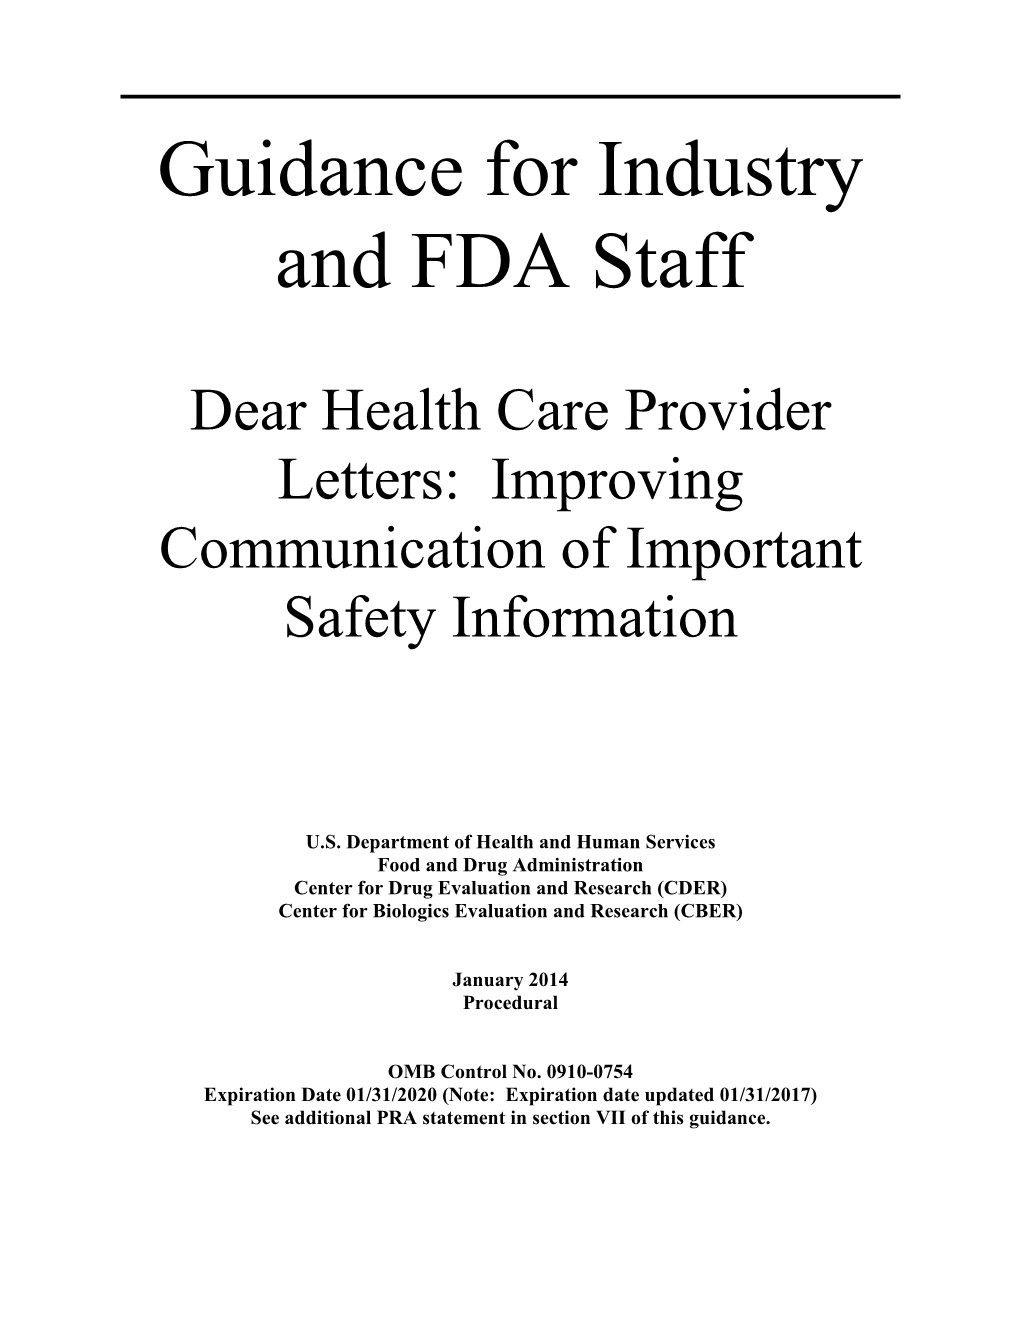 Dear Health Care Provider Letters: Improving Communication of Important Safety Information